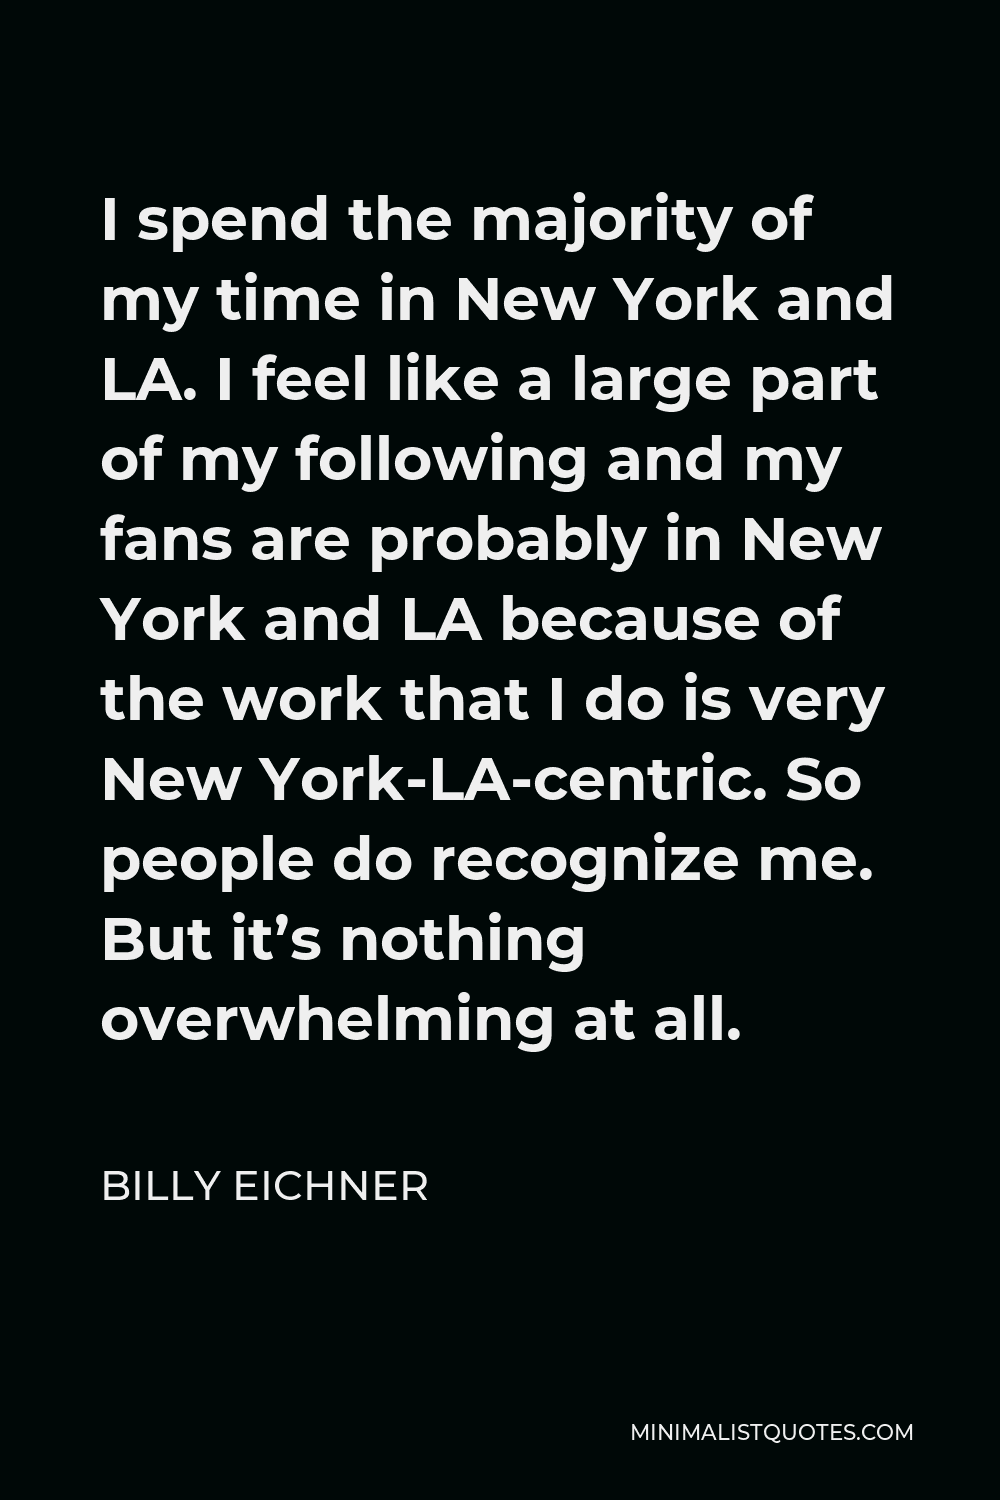 Billy Eichner Quote - I spend the majority of my time in New York and LA. I feel like a large part of my following and my fans are probably in New York and LA because of the work that I do is very New York-LA-centric. So people do recognize me. But it’s nothing overwhelming at all.